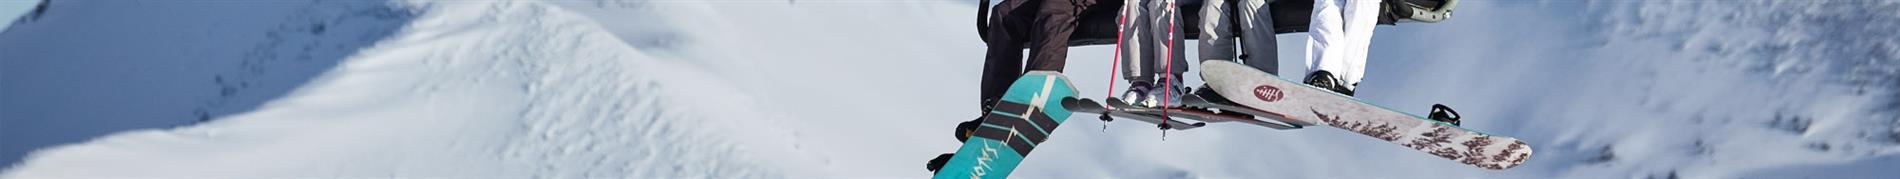 GoPole Women's skis, snowboards, and accessories for everything snow. 